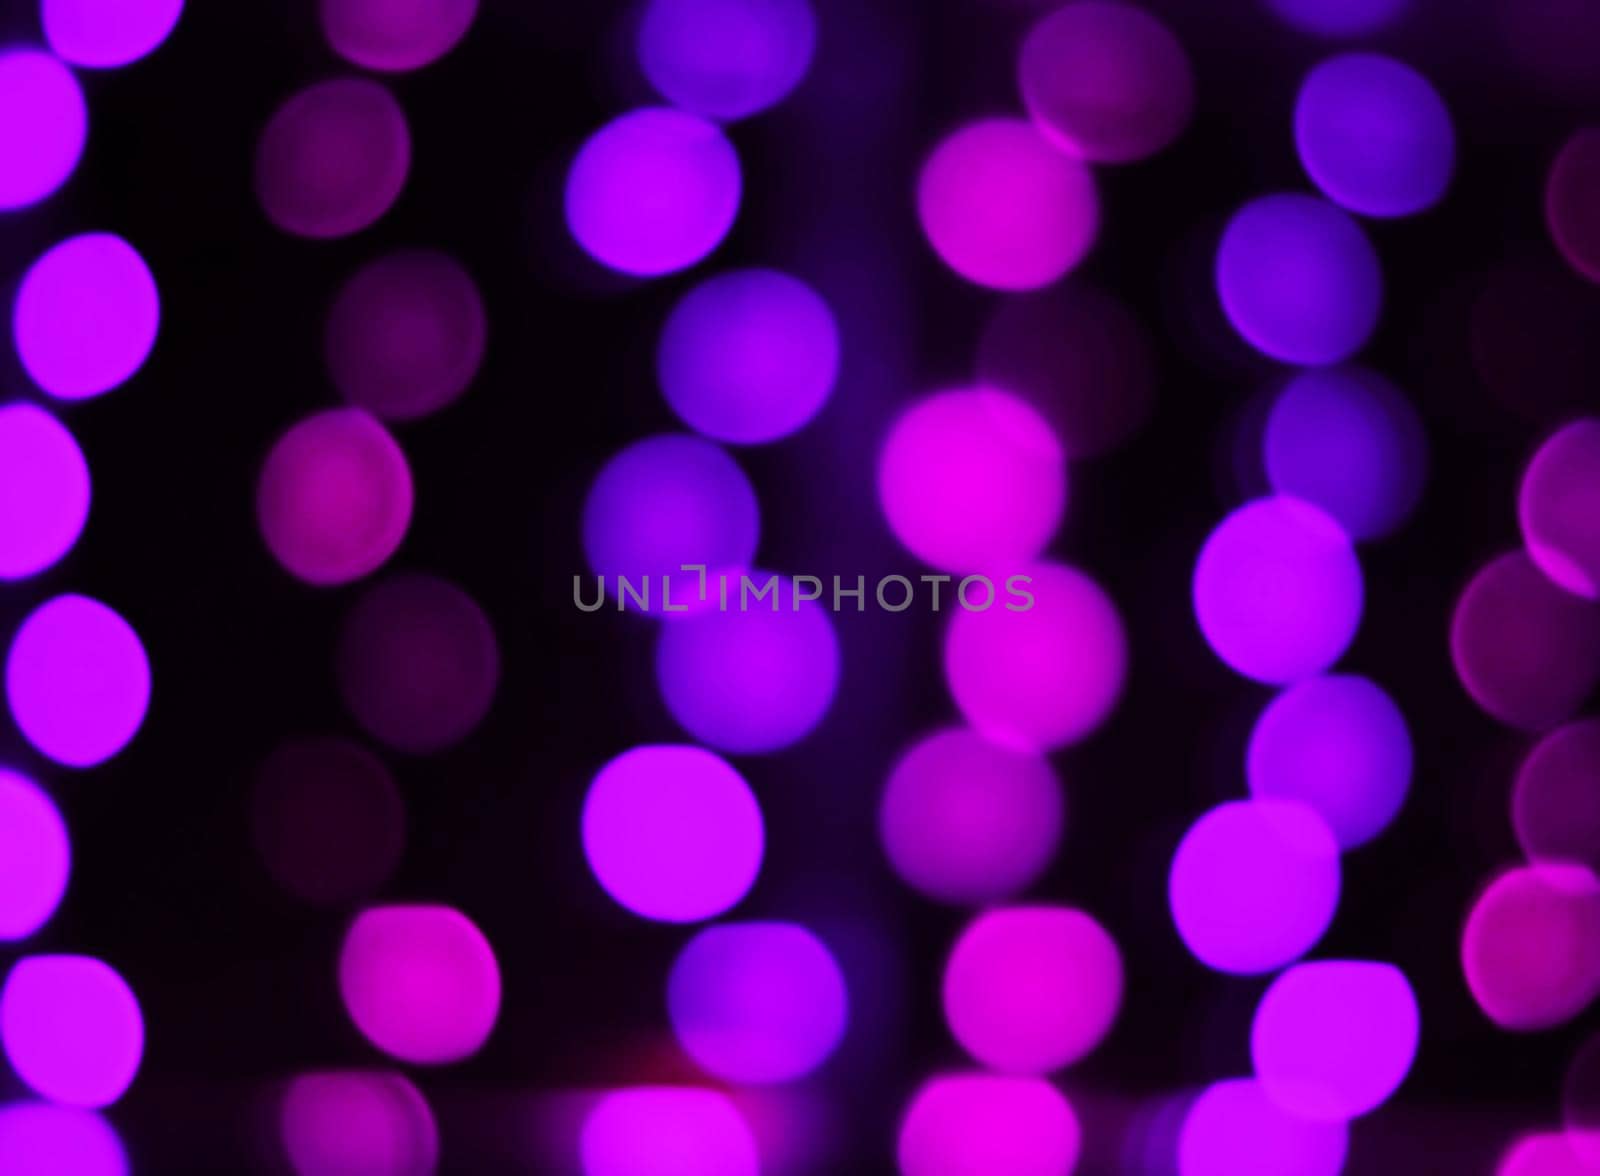 blurred image of purple lights on a black background by SmartPhotoLab